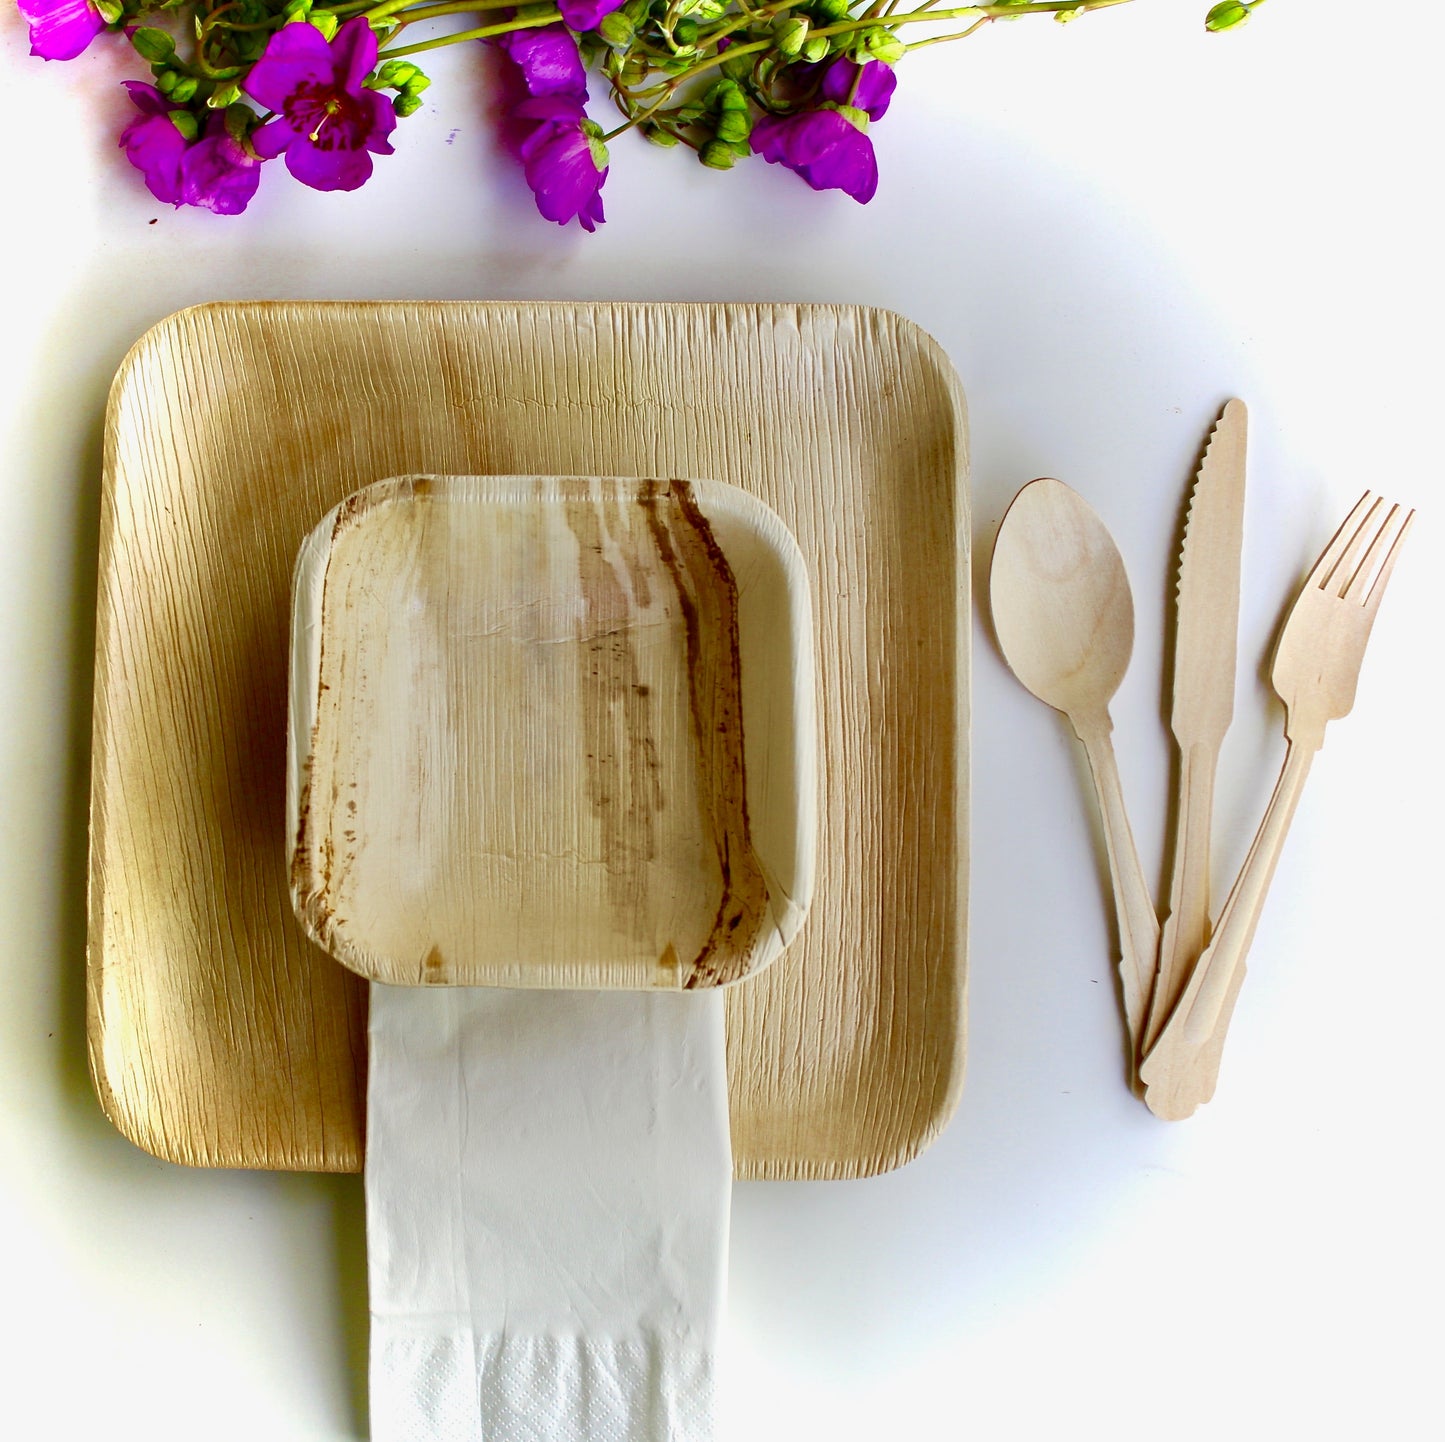 Bamboo Type Palm Leaf 25 Pic 9.5" Square - 25 pice 7" Square " - 25  pic 6" Square  - 75 pic Cutlery - 50 Pic Napkin